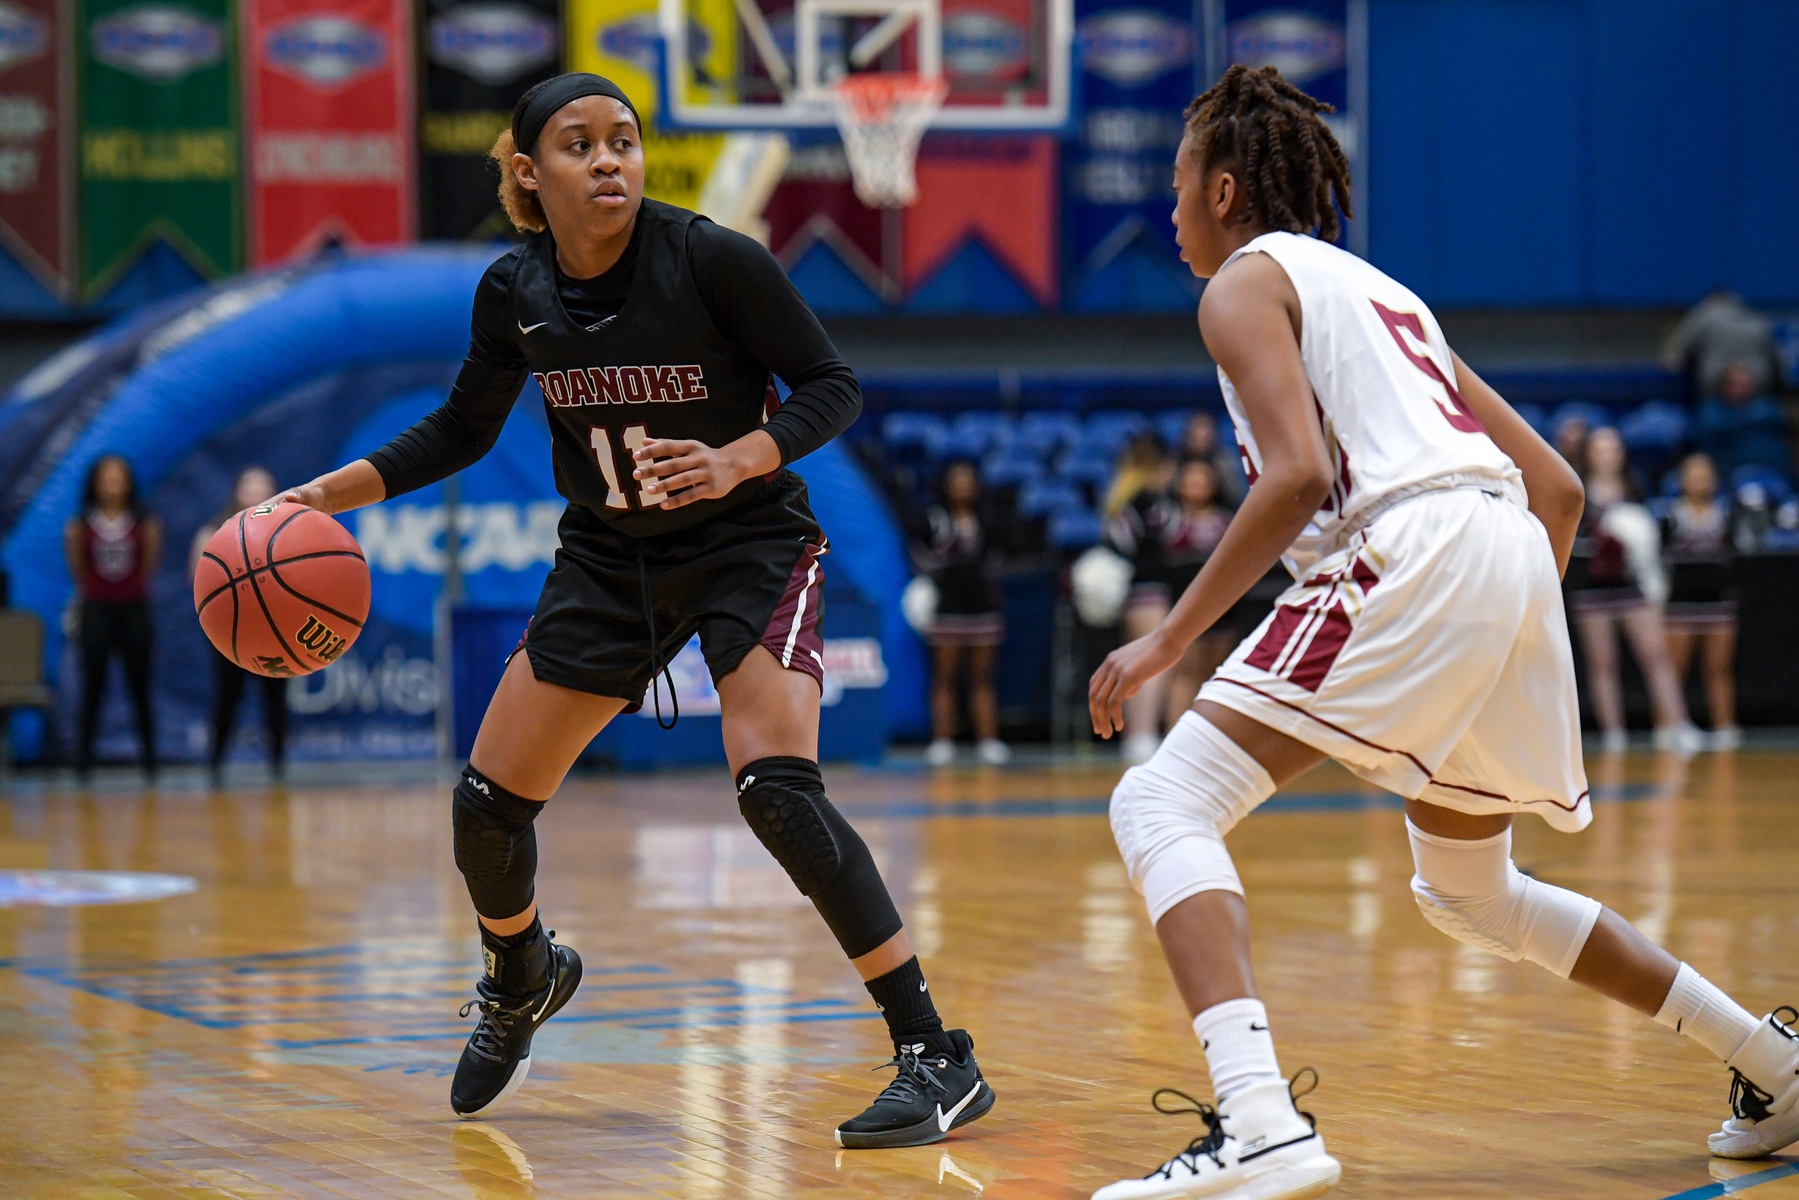 Sixth-seeded Roanoke College scored an 85-58 win over No. 3 seed Bridgewater in the Quarterfinals of the 2020 ODAC Women’s Basketball Tournament.